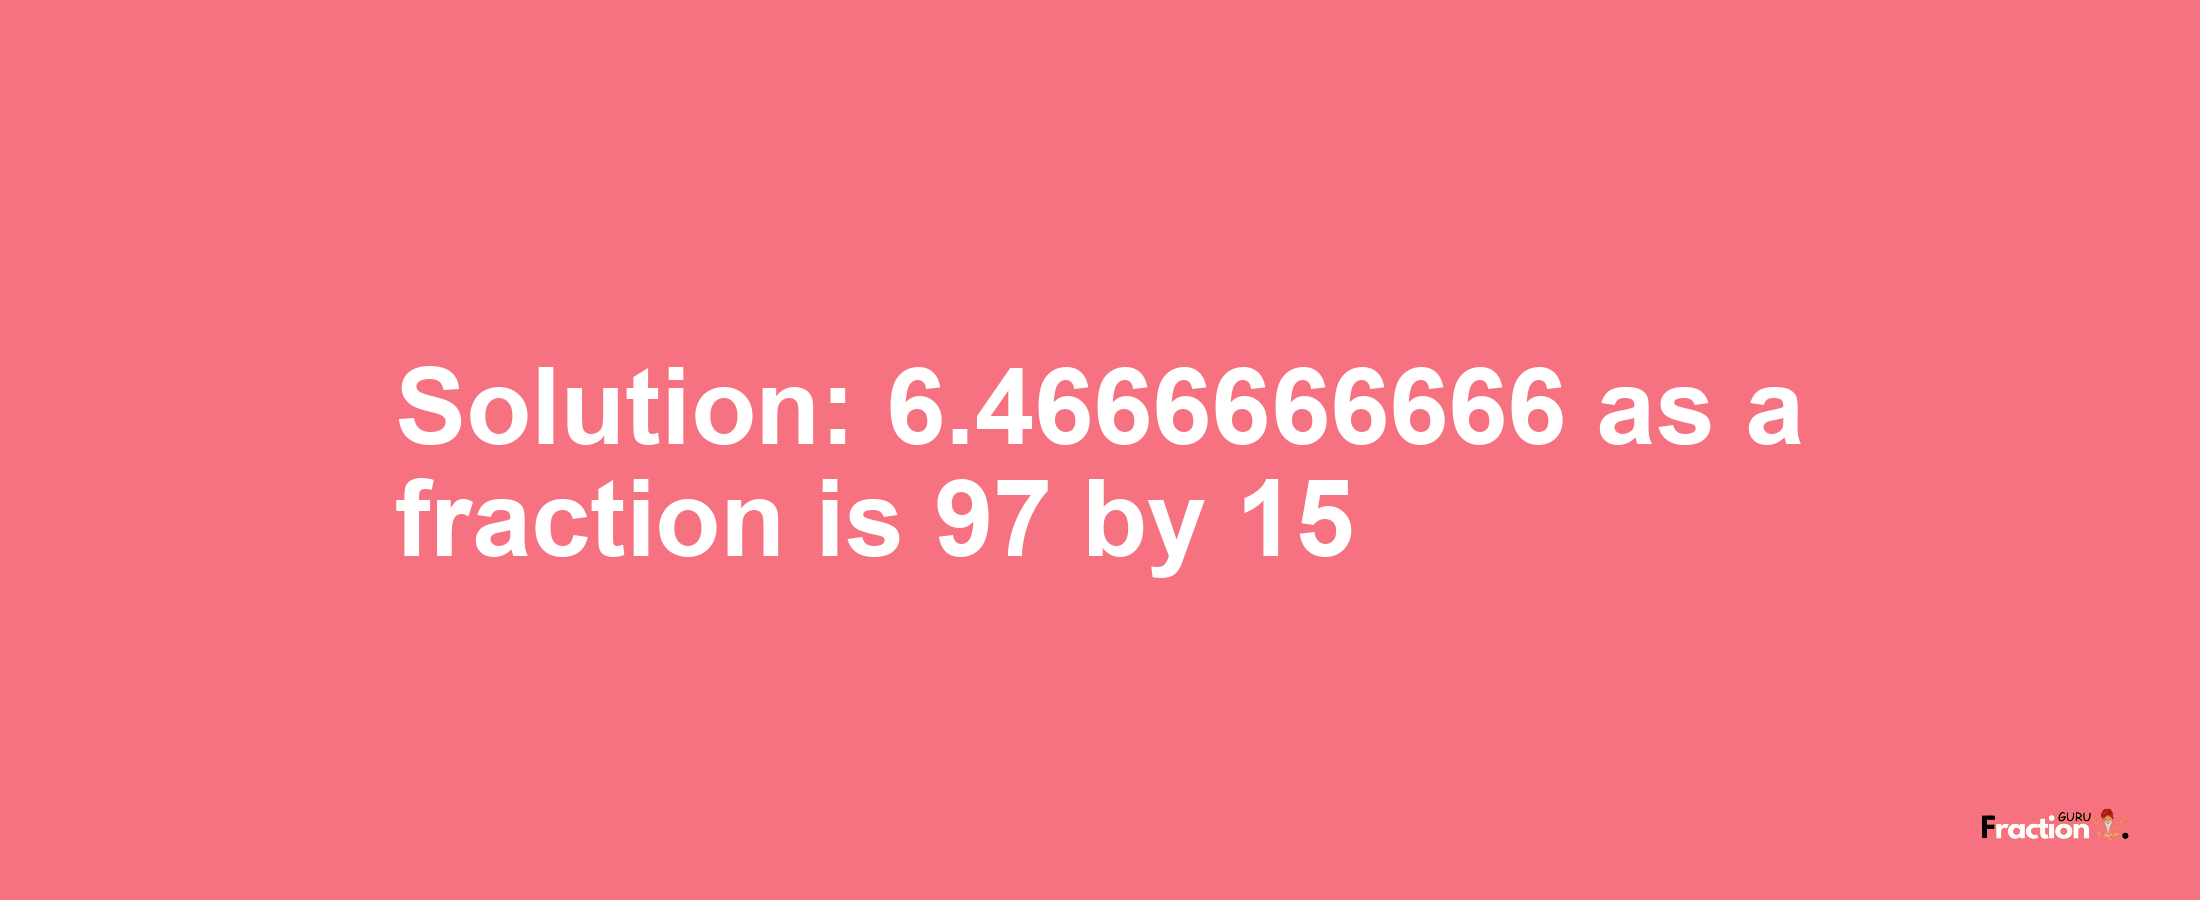 Solution:6.4666666666 as a fraction is 97/15